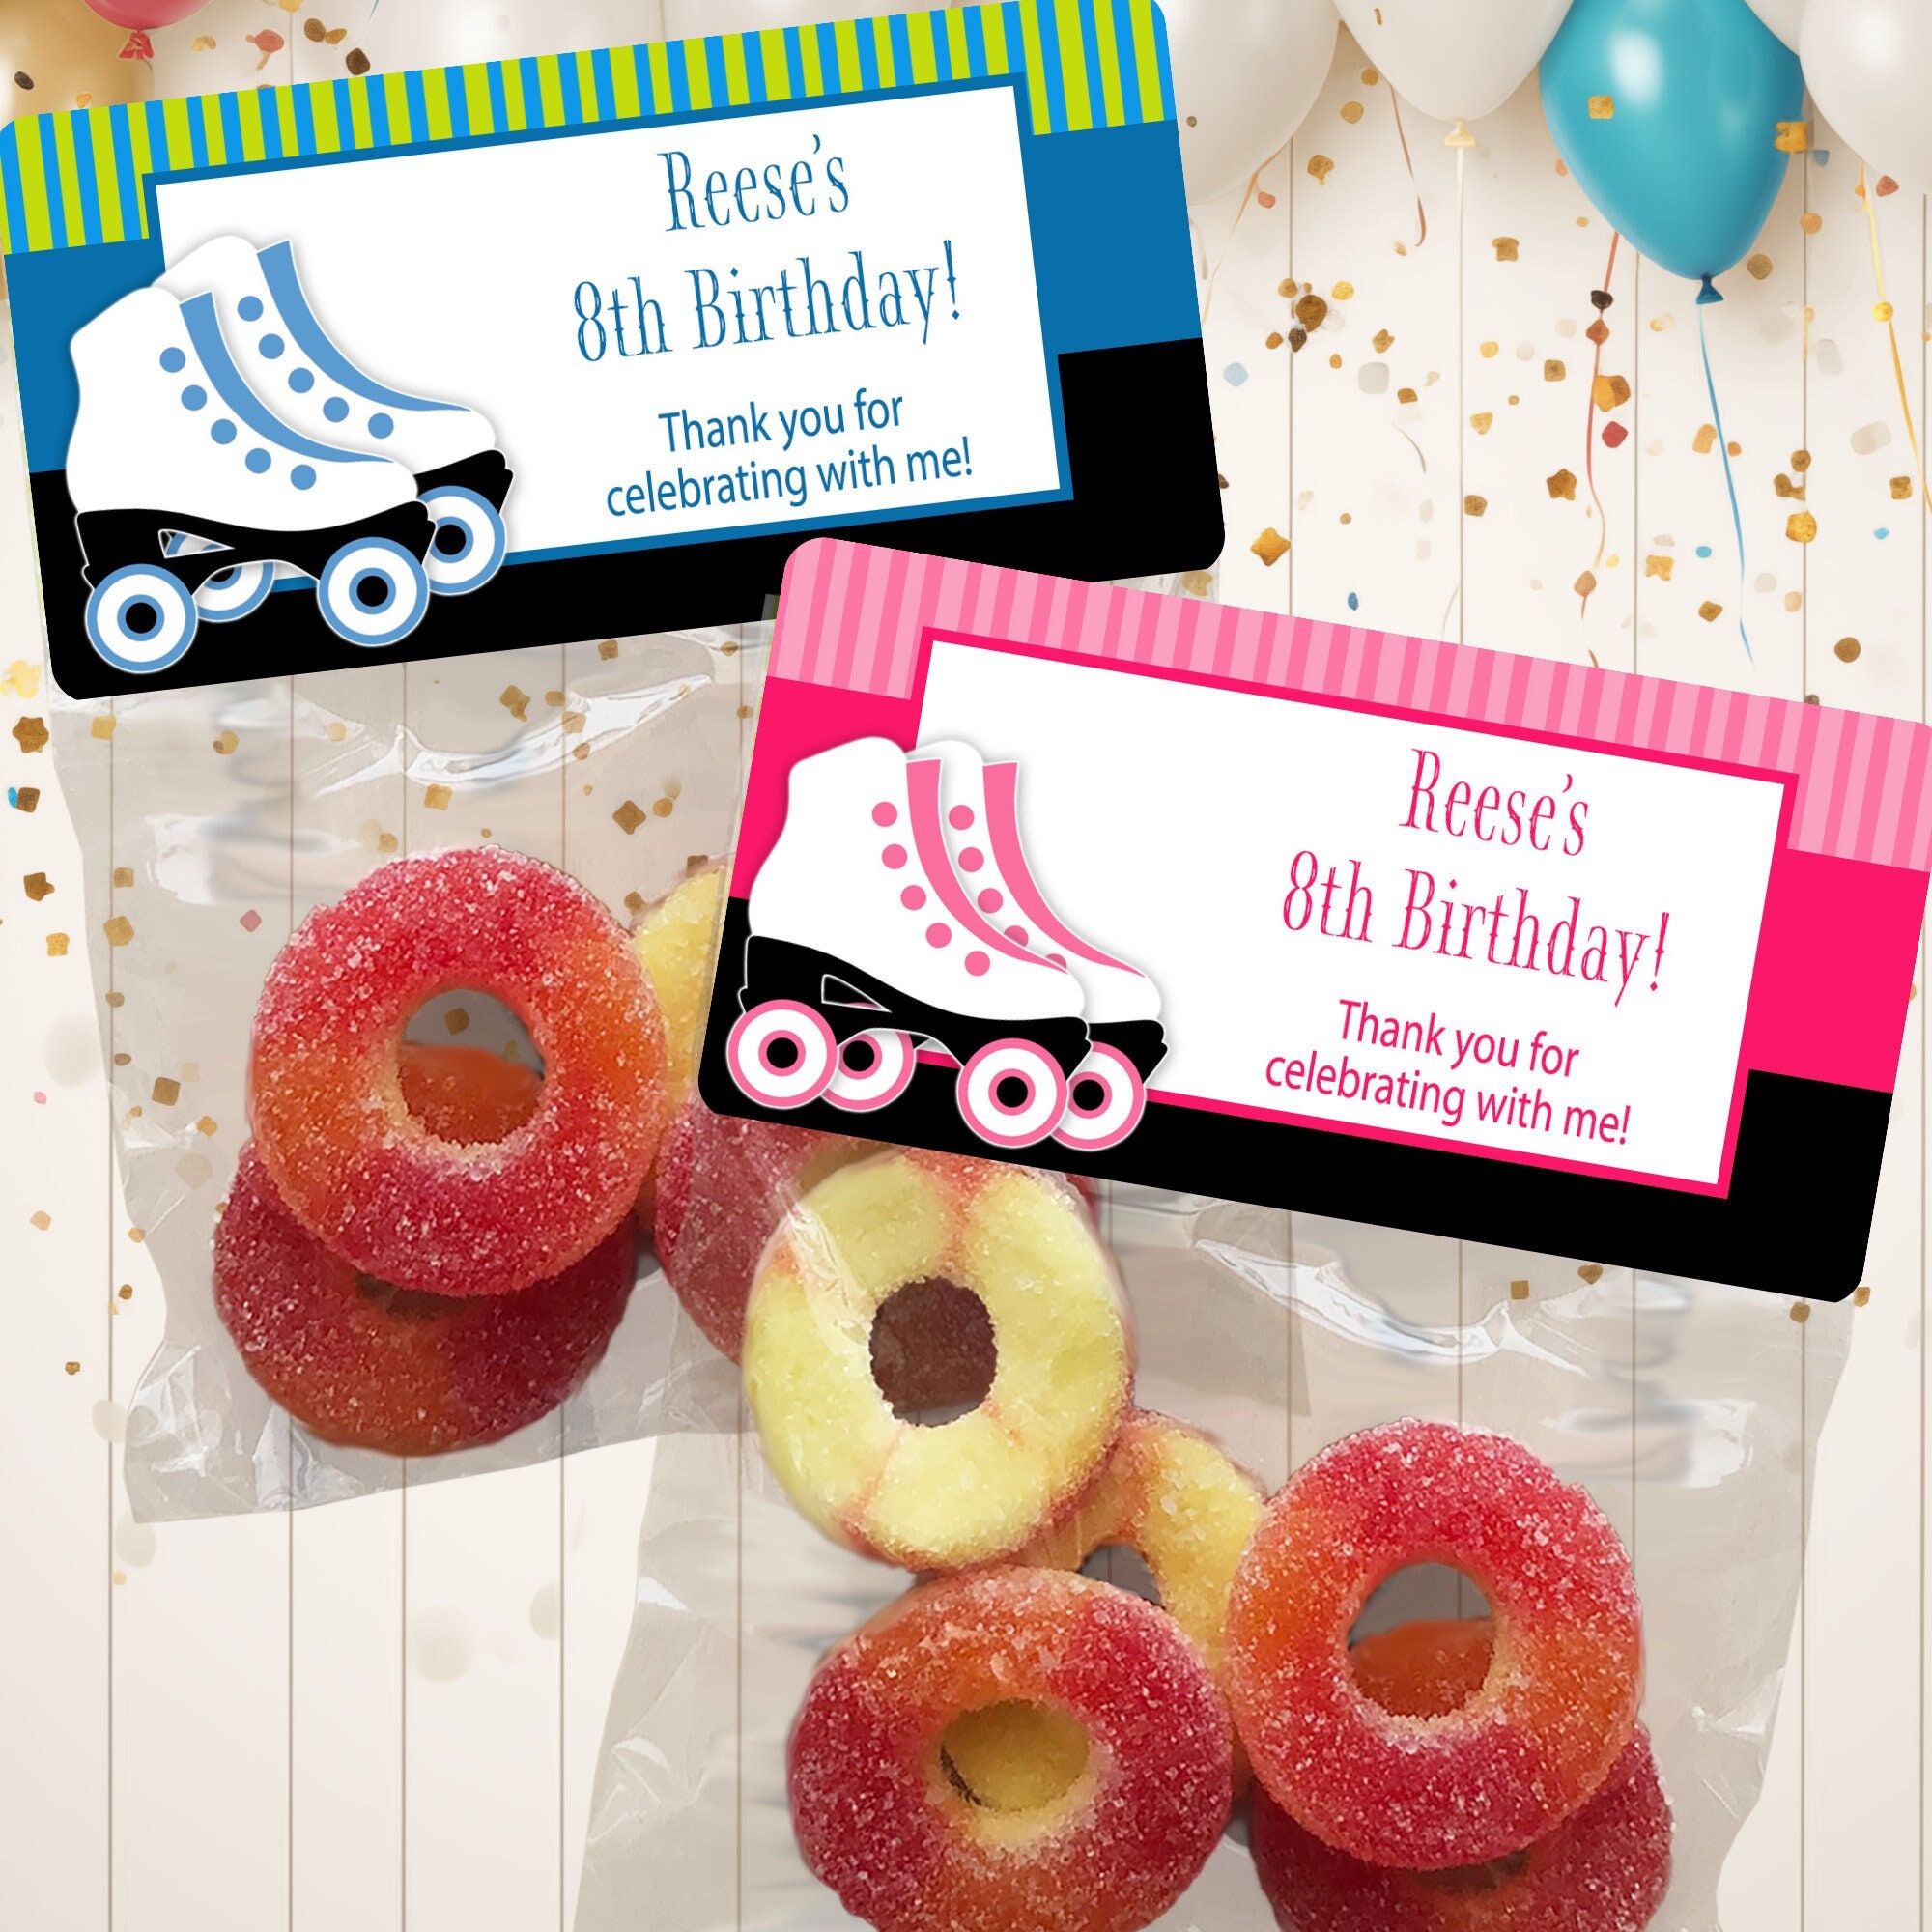 100 Pack Donut Party Favor Goodie Bags for Birthday Party and Bridal Shower - Multi